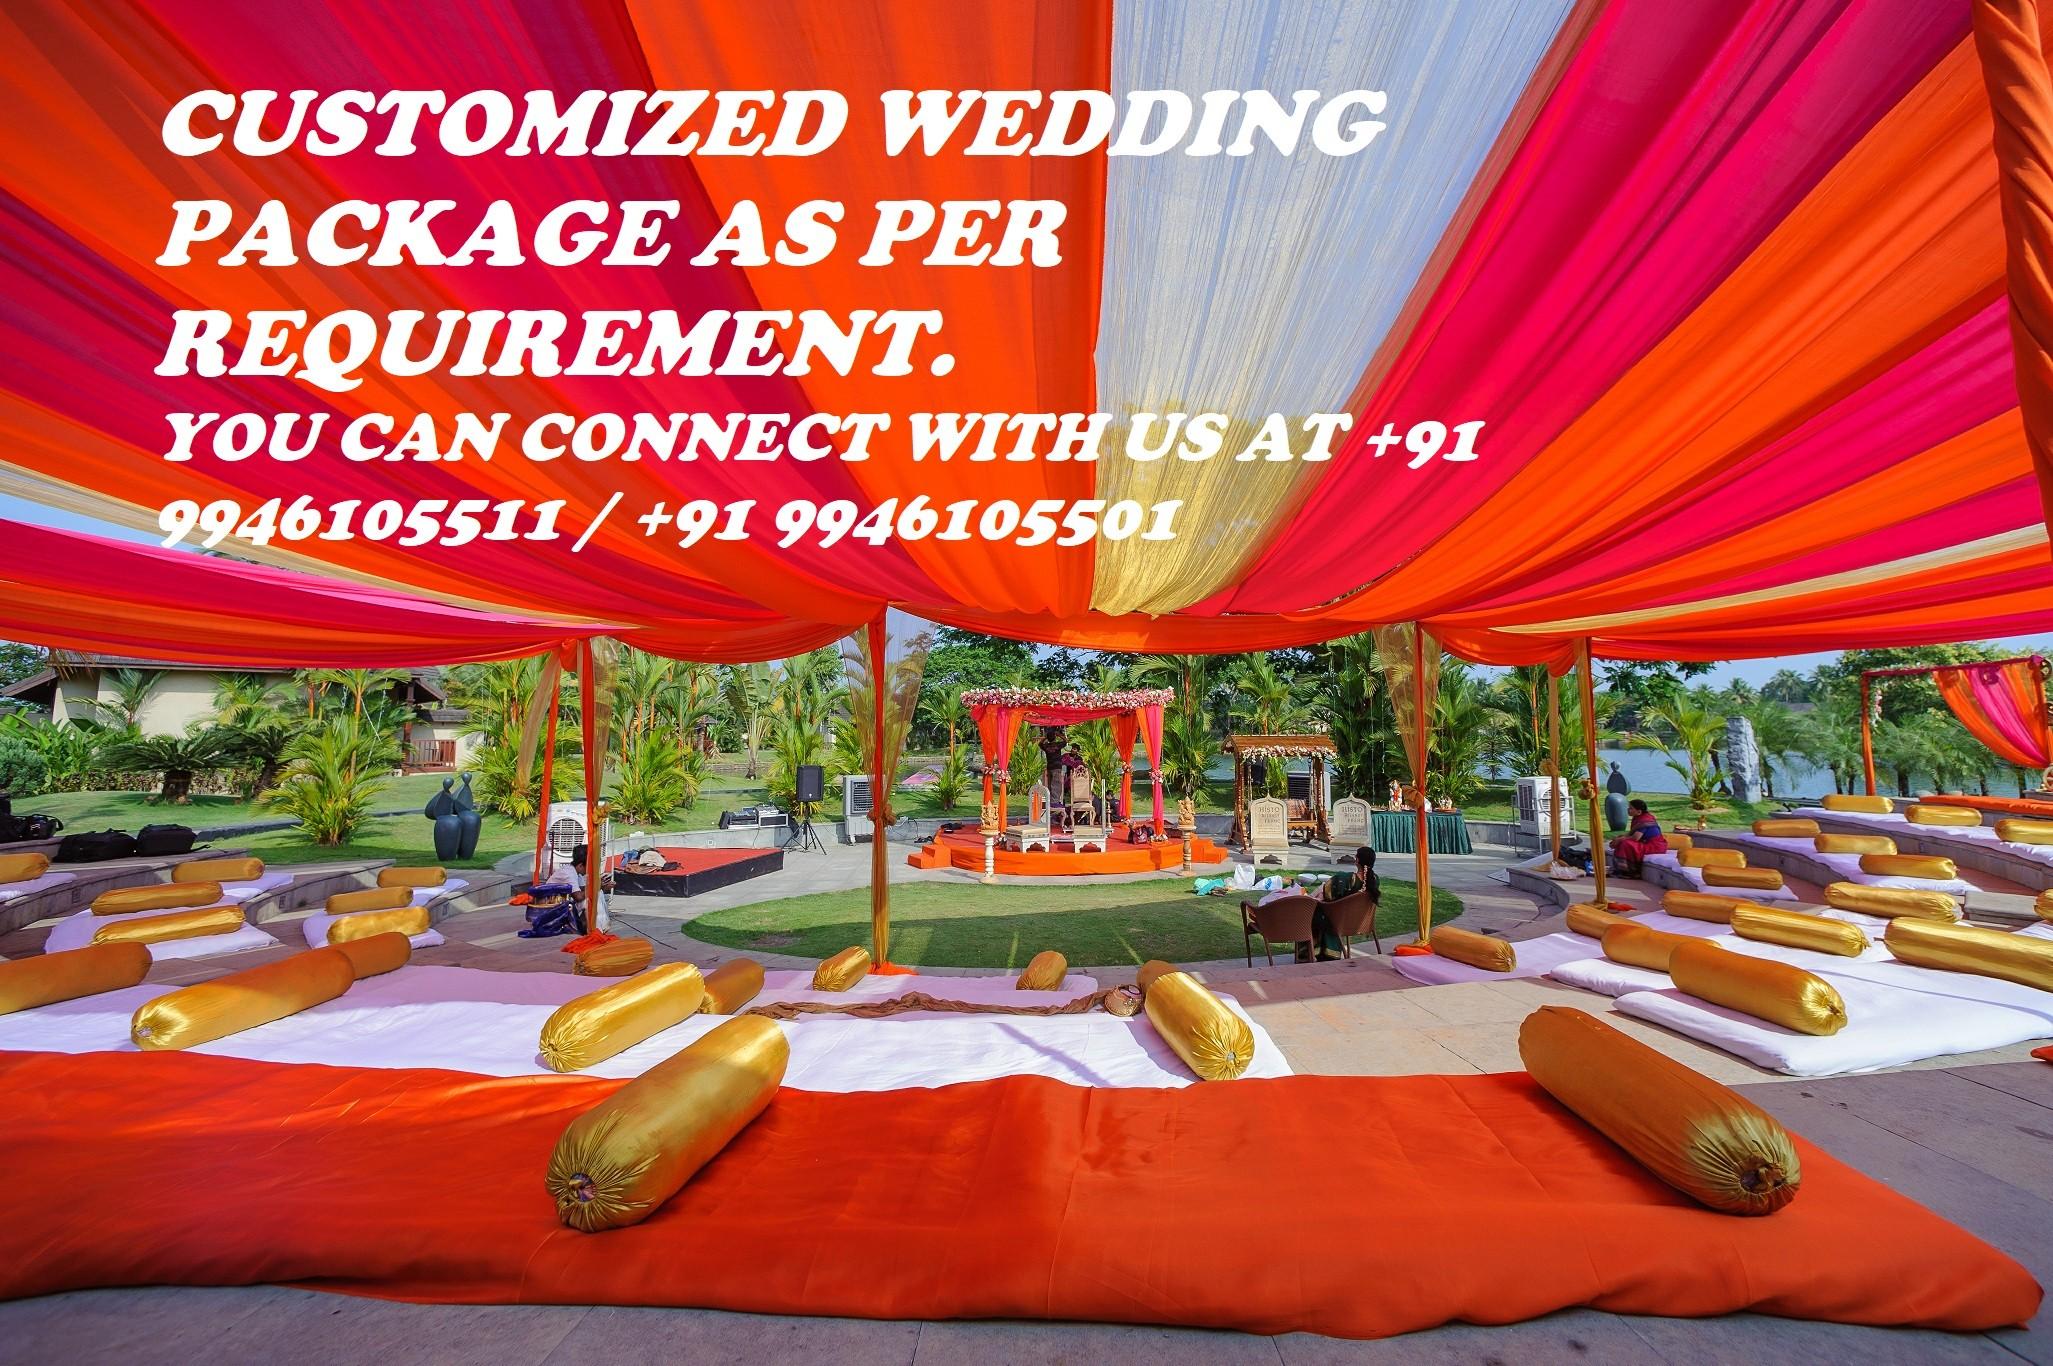 150-180 pax destination wedding for full property buy-out  inr 40 lakhs for two nights